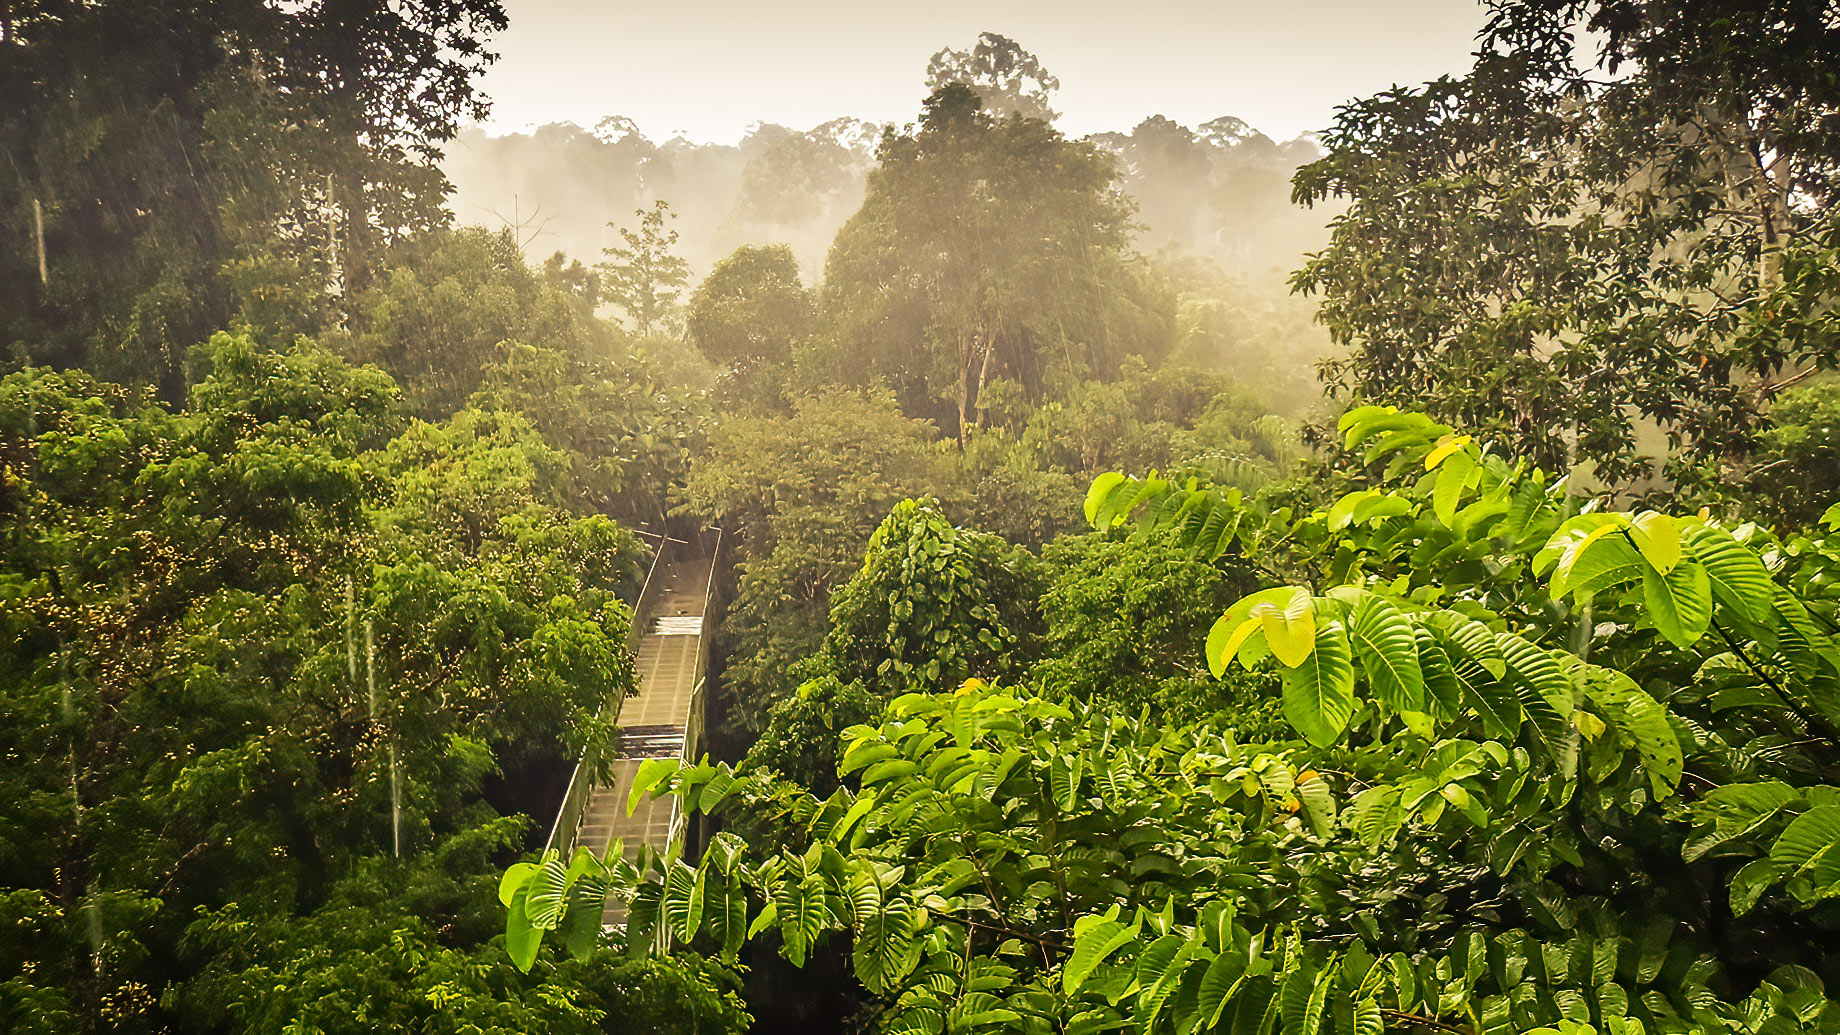 Rainforest View From The Canopy Walk Tower In Sepilok, Borneo